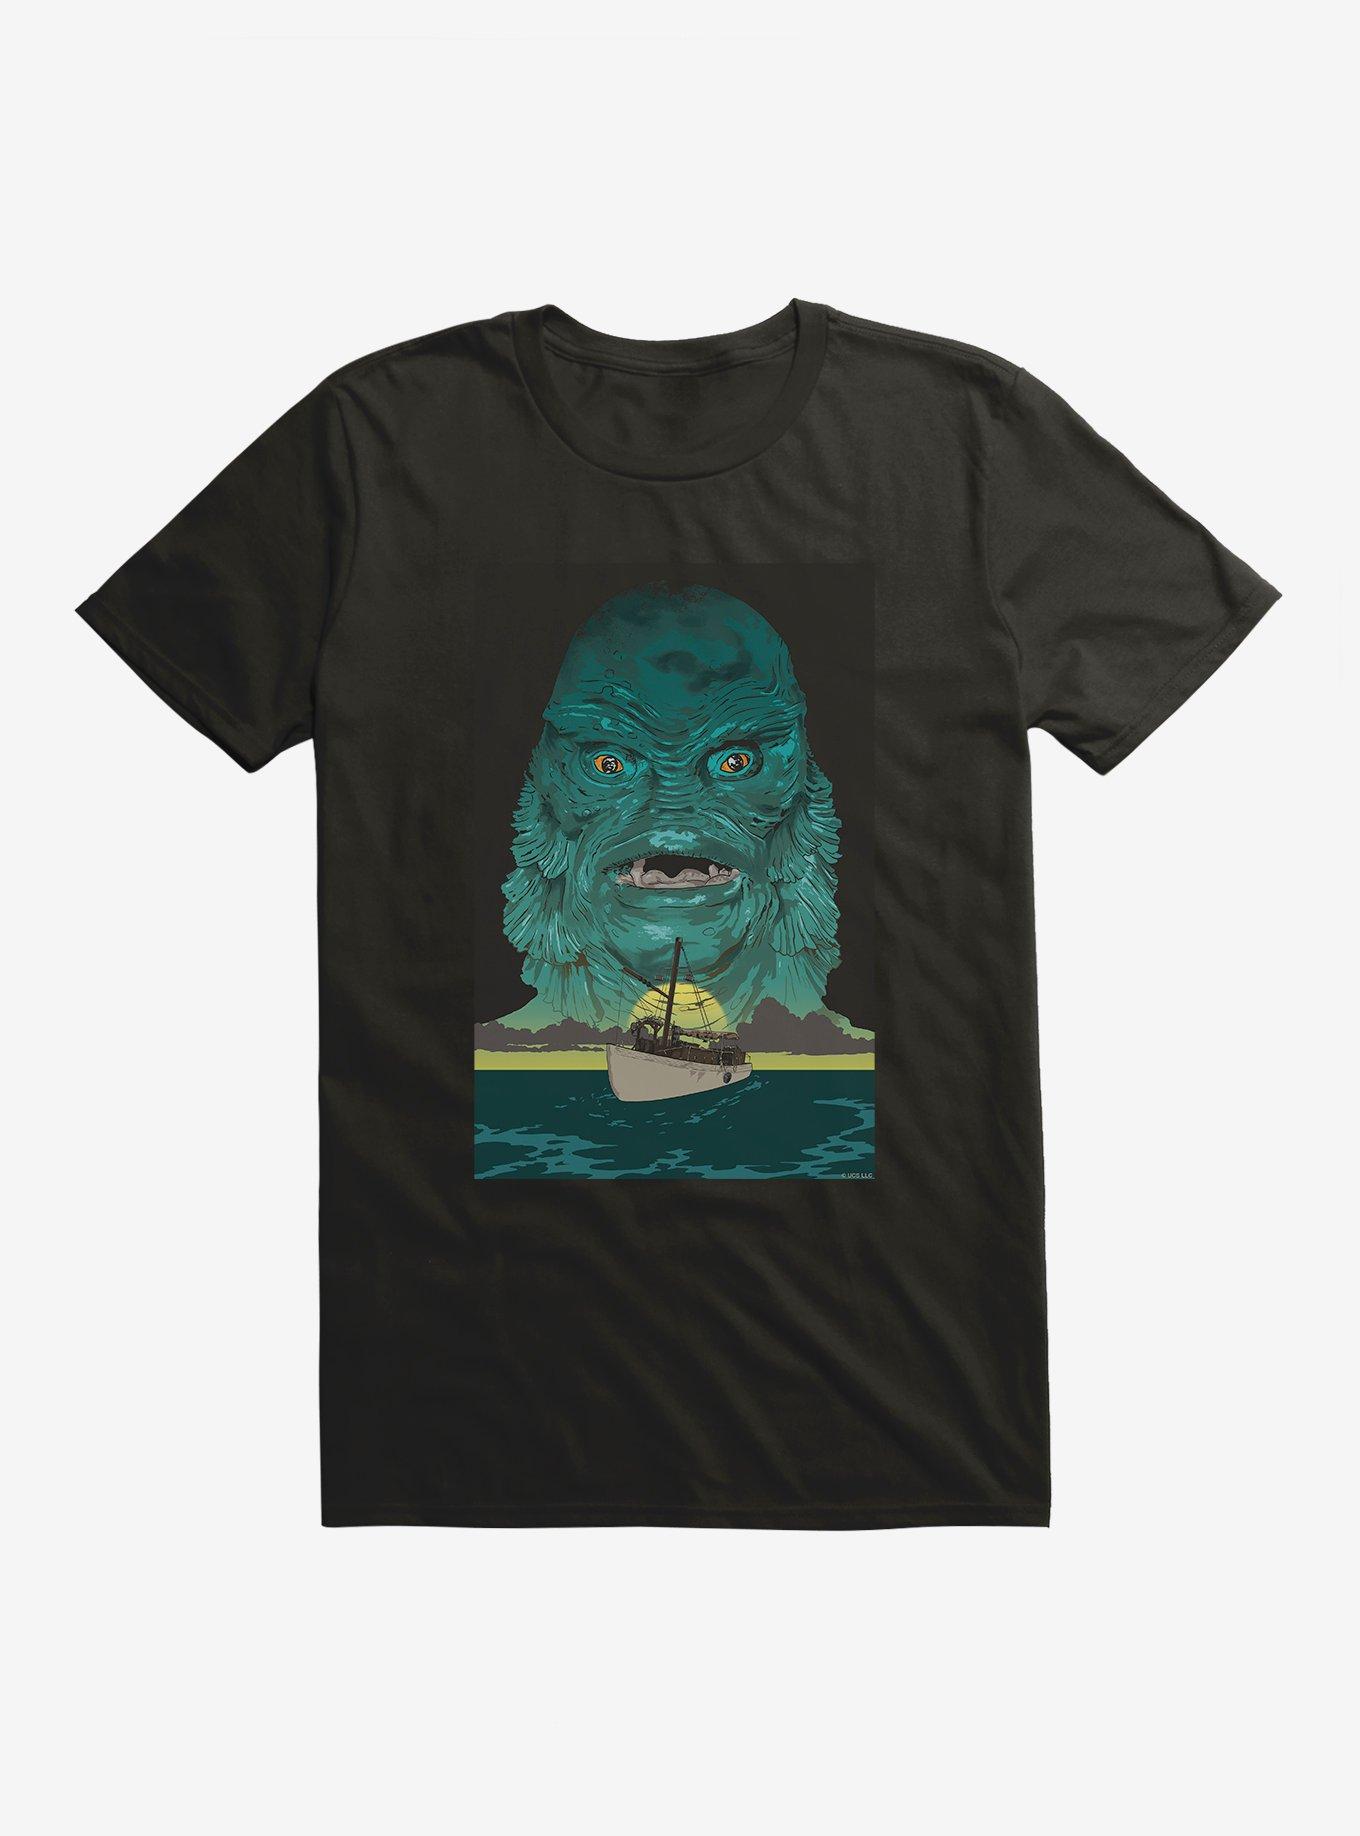 Creature From The Black Lagoon Turn Back T-Shirt, BLACK, hi-res